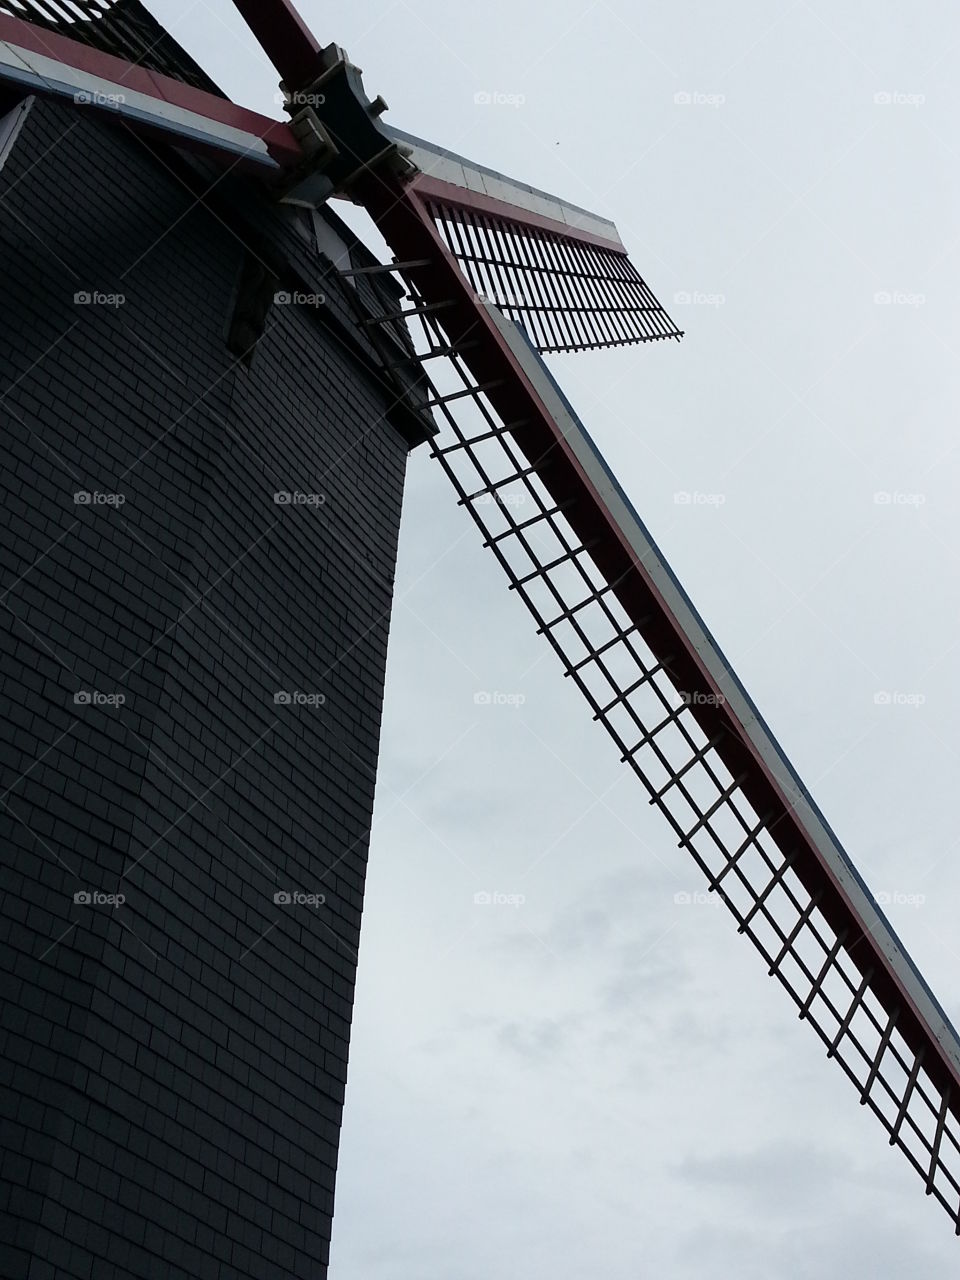 A giant windmill in Bruges, Belgium.